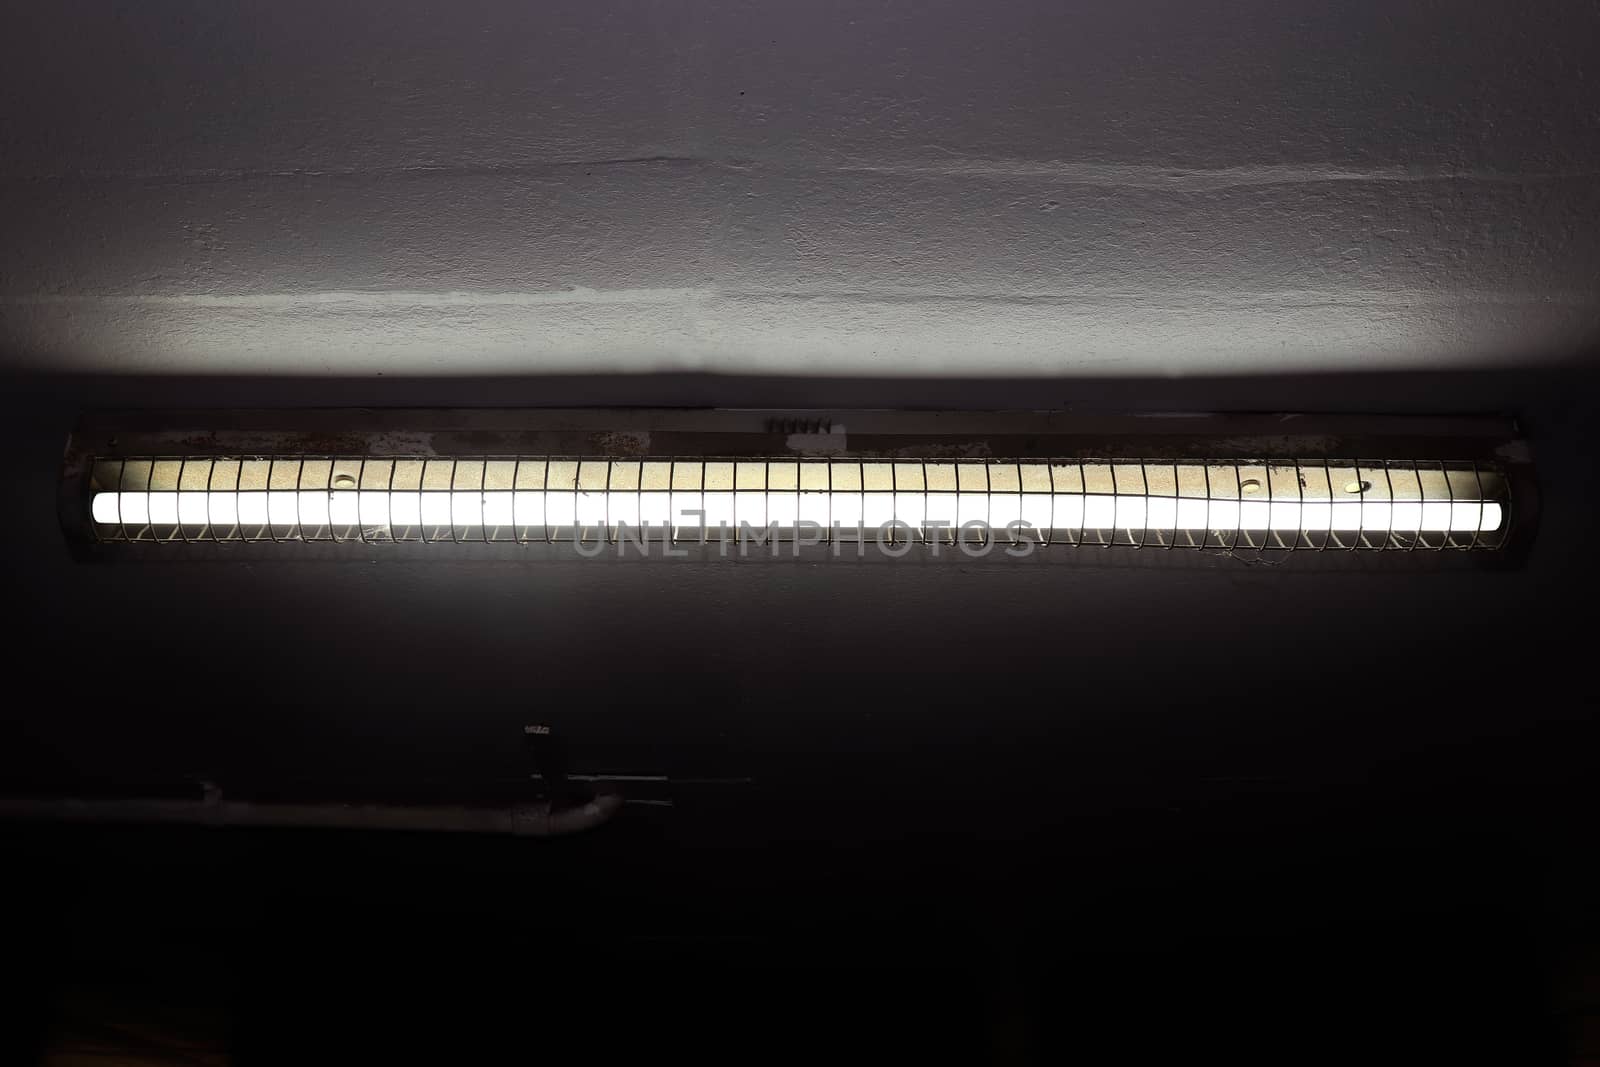 old fluorescent lamps on the ceiling, fluorescent lamps in dark, neon light, fluorescent light bulb as electric energy